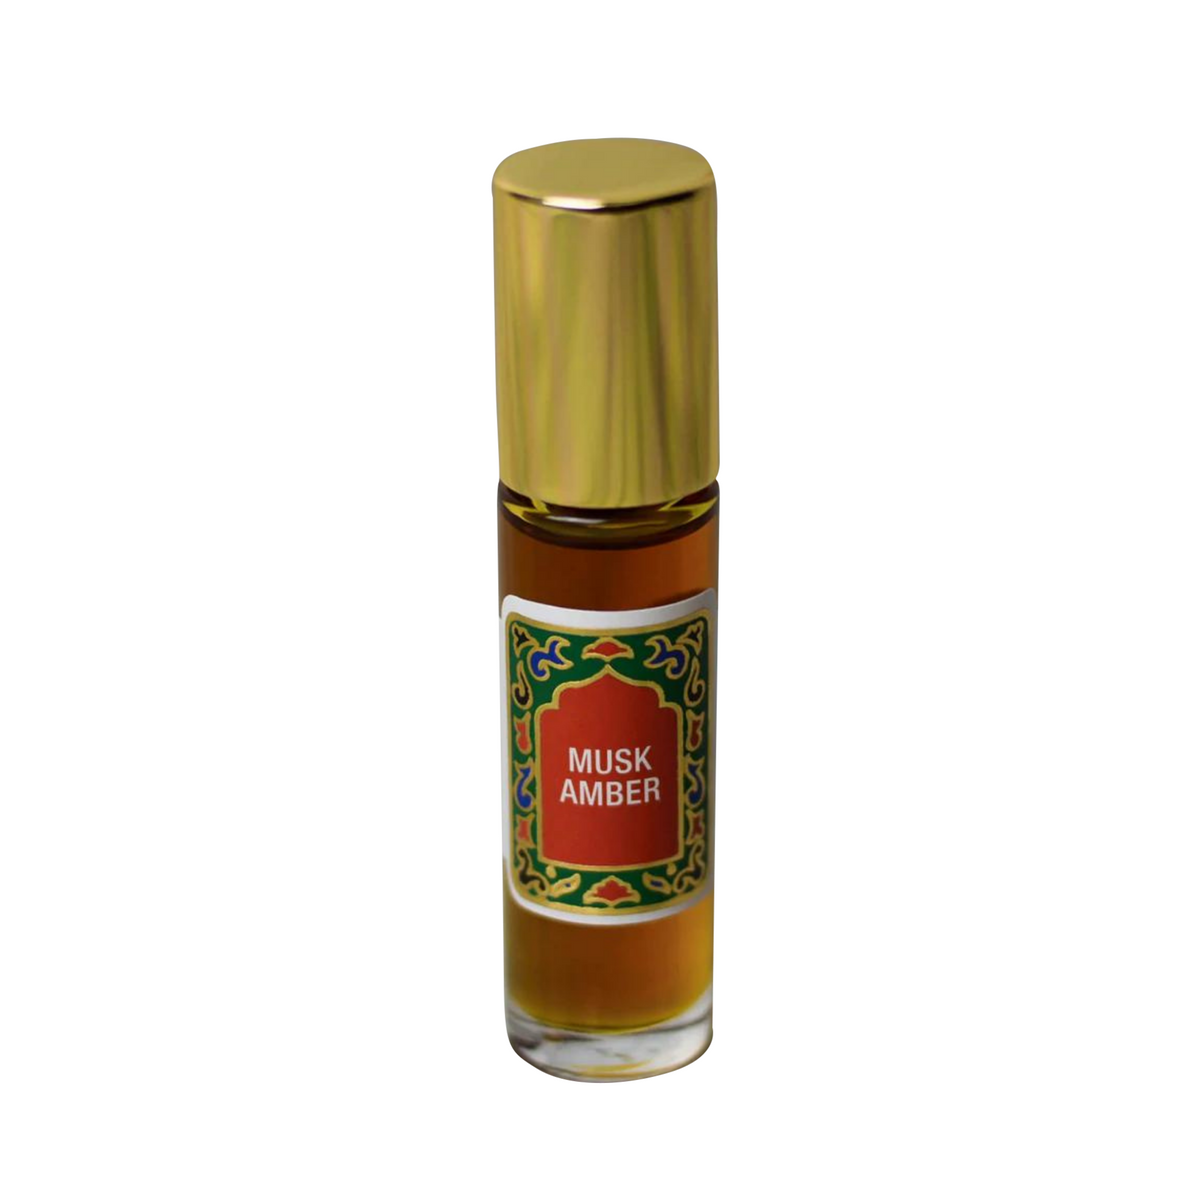 Nemat Perfumes in Amber Roll-on